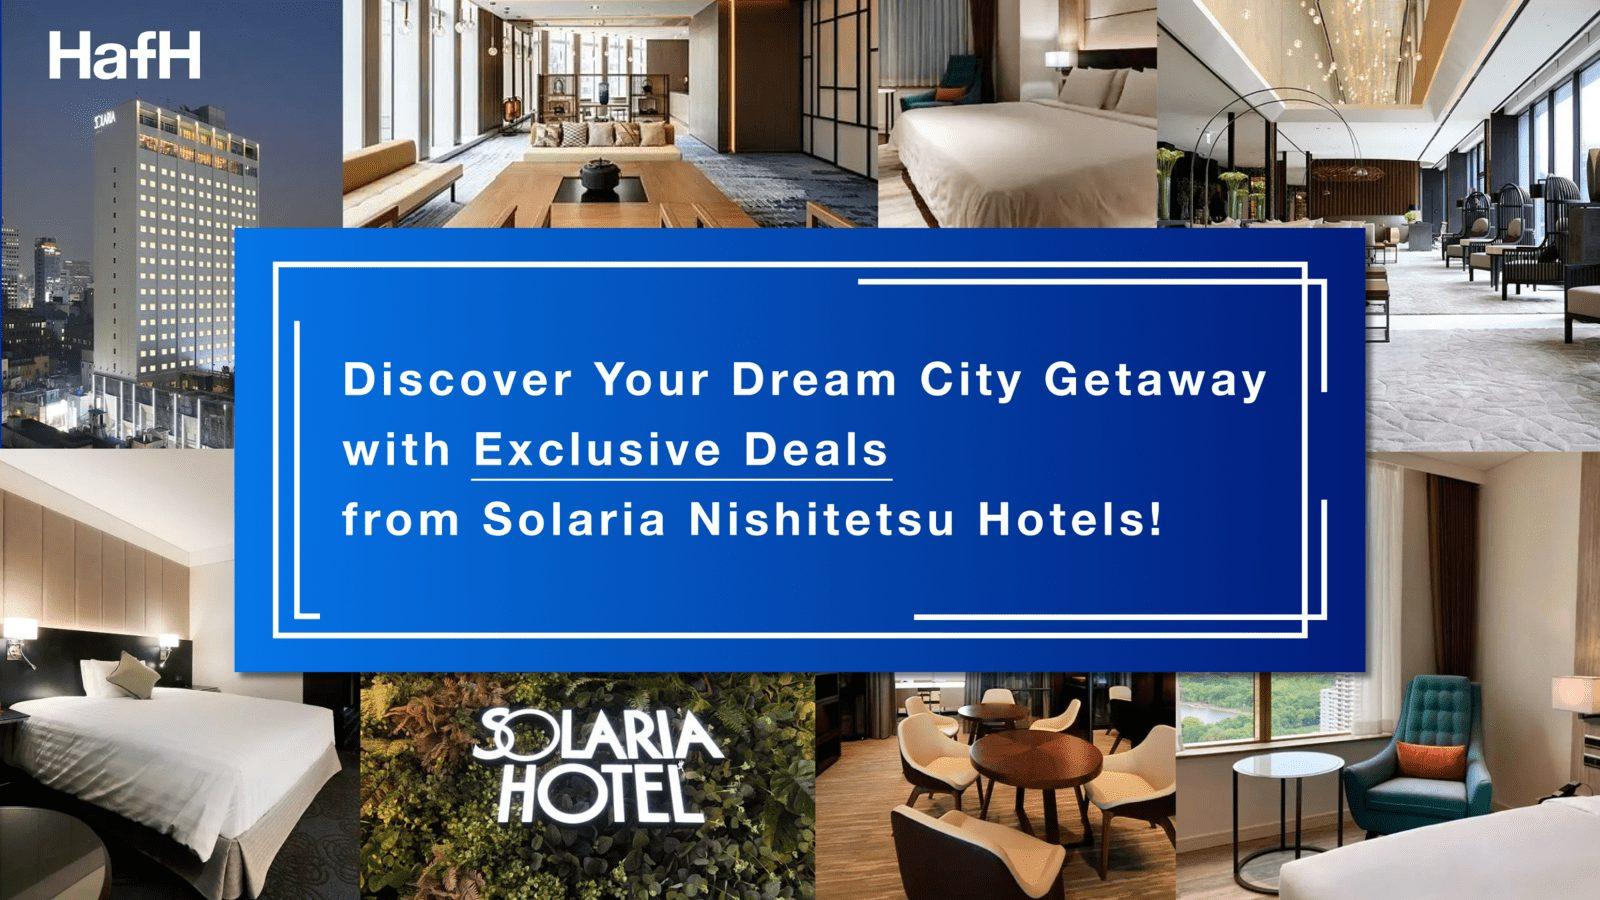 Discover Your Dream City Getaway with Exclusive Deals from Solaria Nishitetsu Hotels!